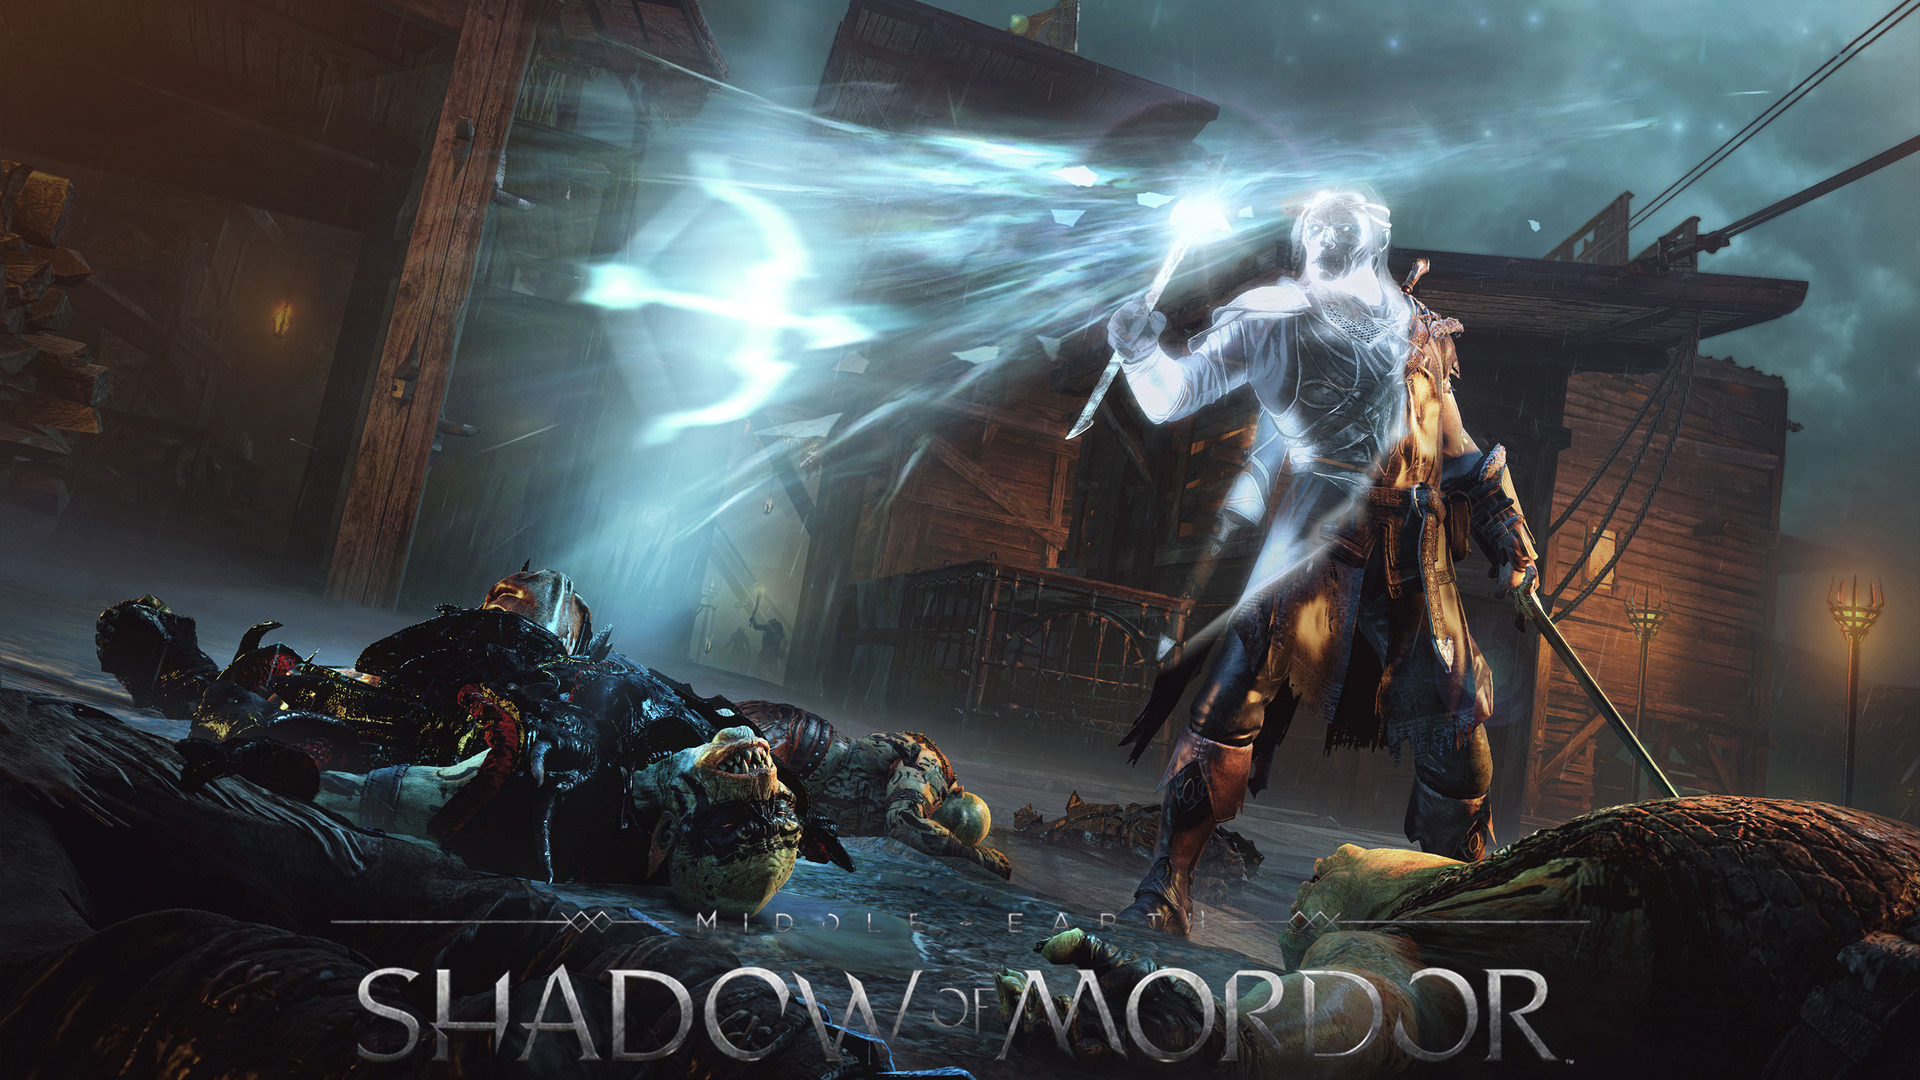 Middle-earth: Shadow of Mordor Full Review